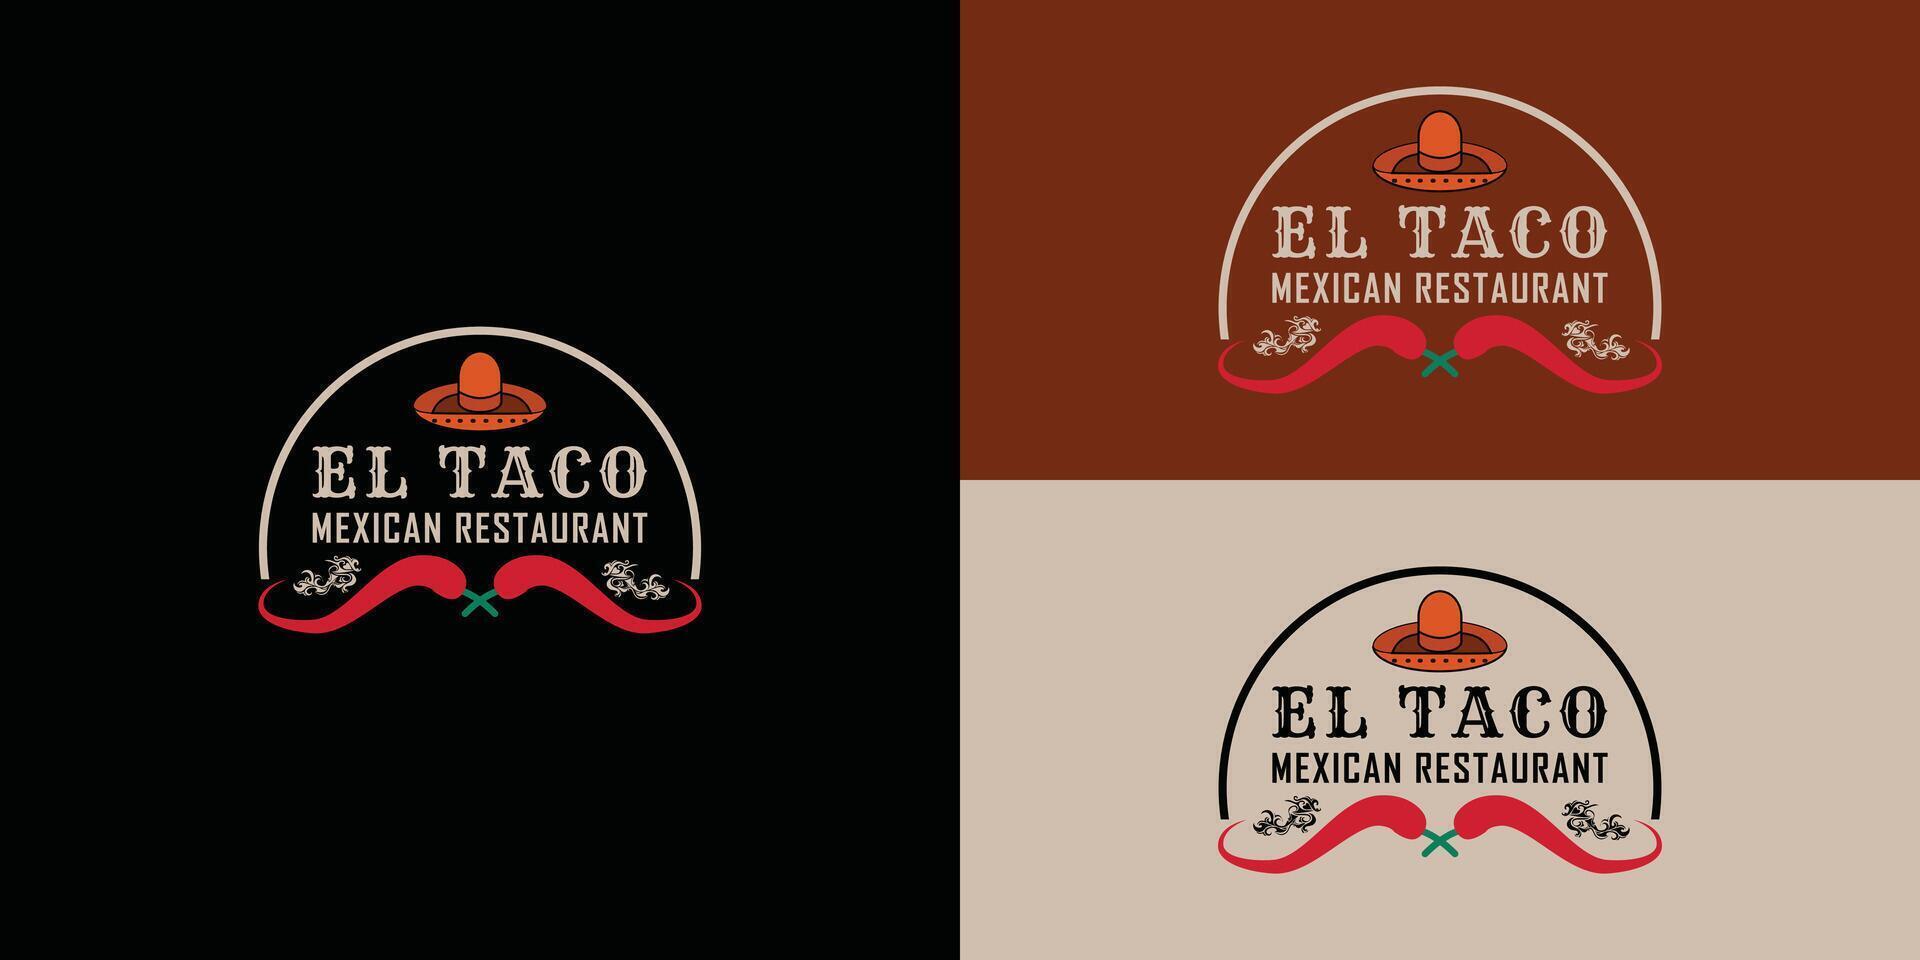 Mexican Hat and cross red chili Logo applied for the Mexican restaurant logo design inspiration. Chili Pepper with artistic pattern Mexican flag for Taco Sauce logo design vector